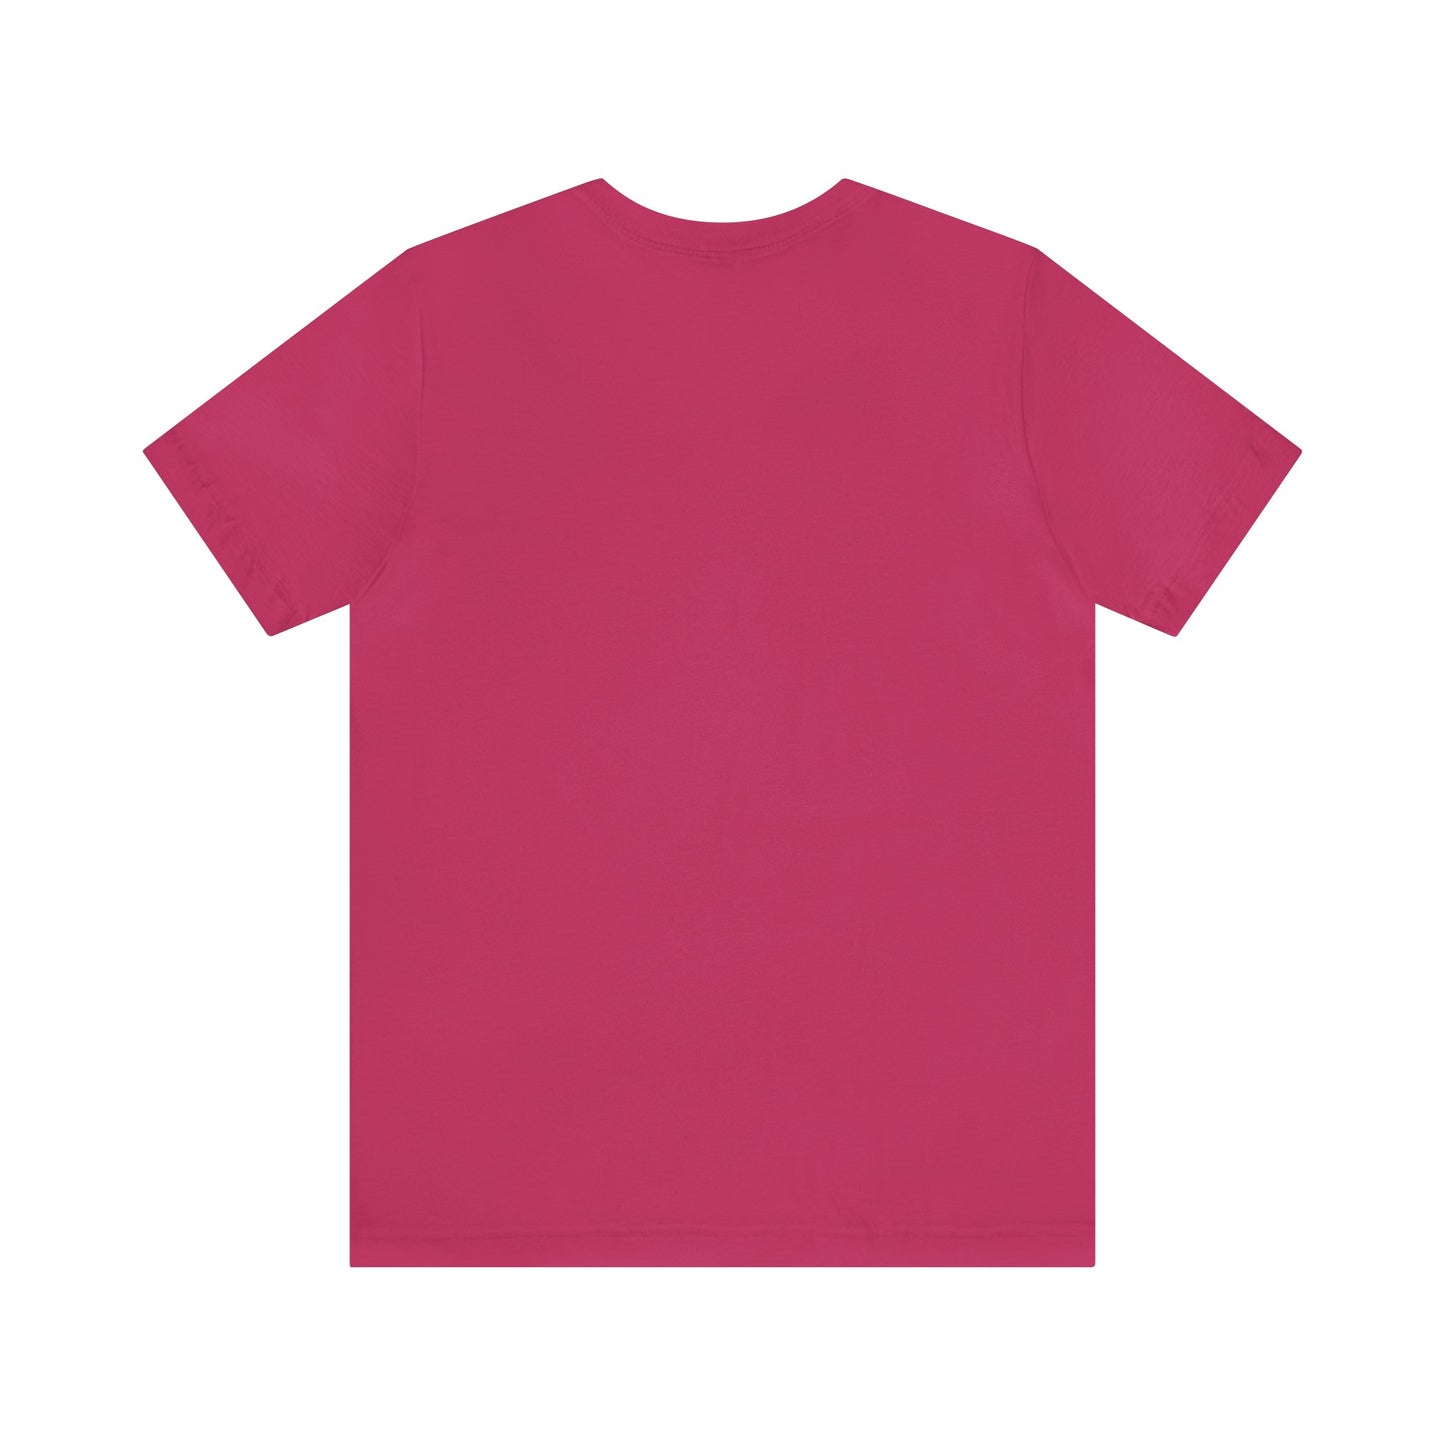 A lightweight fabric pink Printify Unisex Jersey Short Sleeve Tee on a white background.